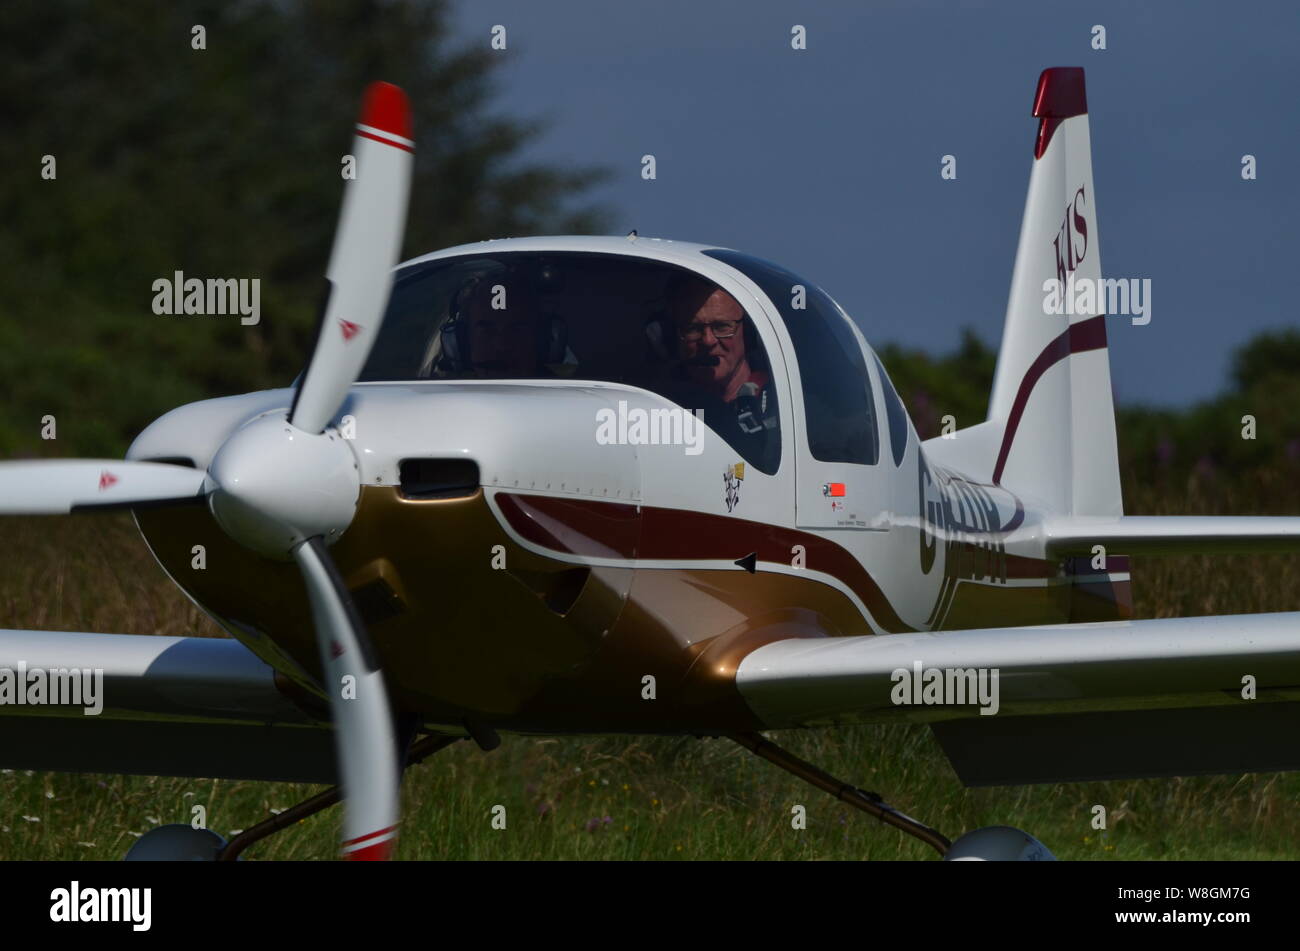 A Tri-R KIS TR-1 single engine light aircraft on the ground at Dornoch Airstrip, Scottish Highlands, as part of the annual Dornoch Fly-In, 2019. Stock Photo